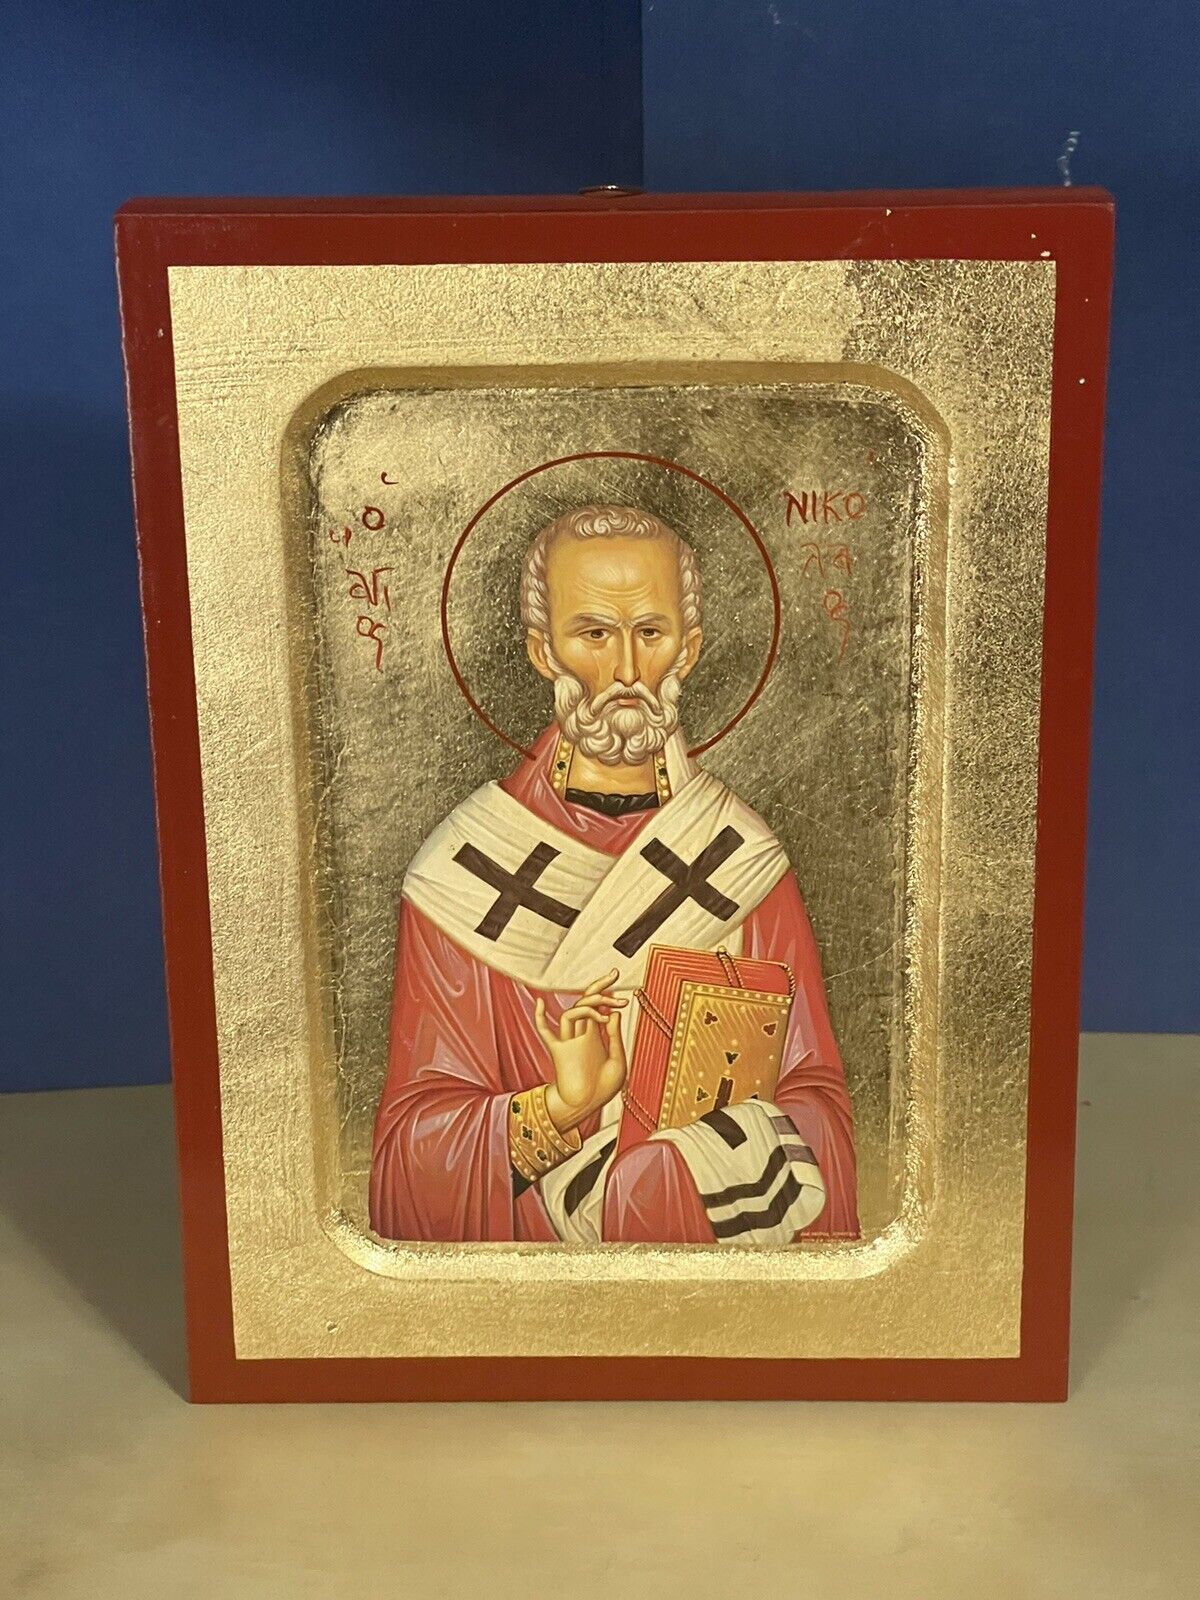 Saint Nicholas -GREEK RUSSIAN WOODEN ICON, CARVED WITH GOLD LEAVES 6x8 inch